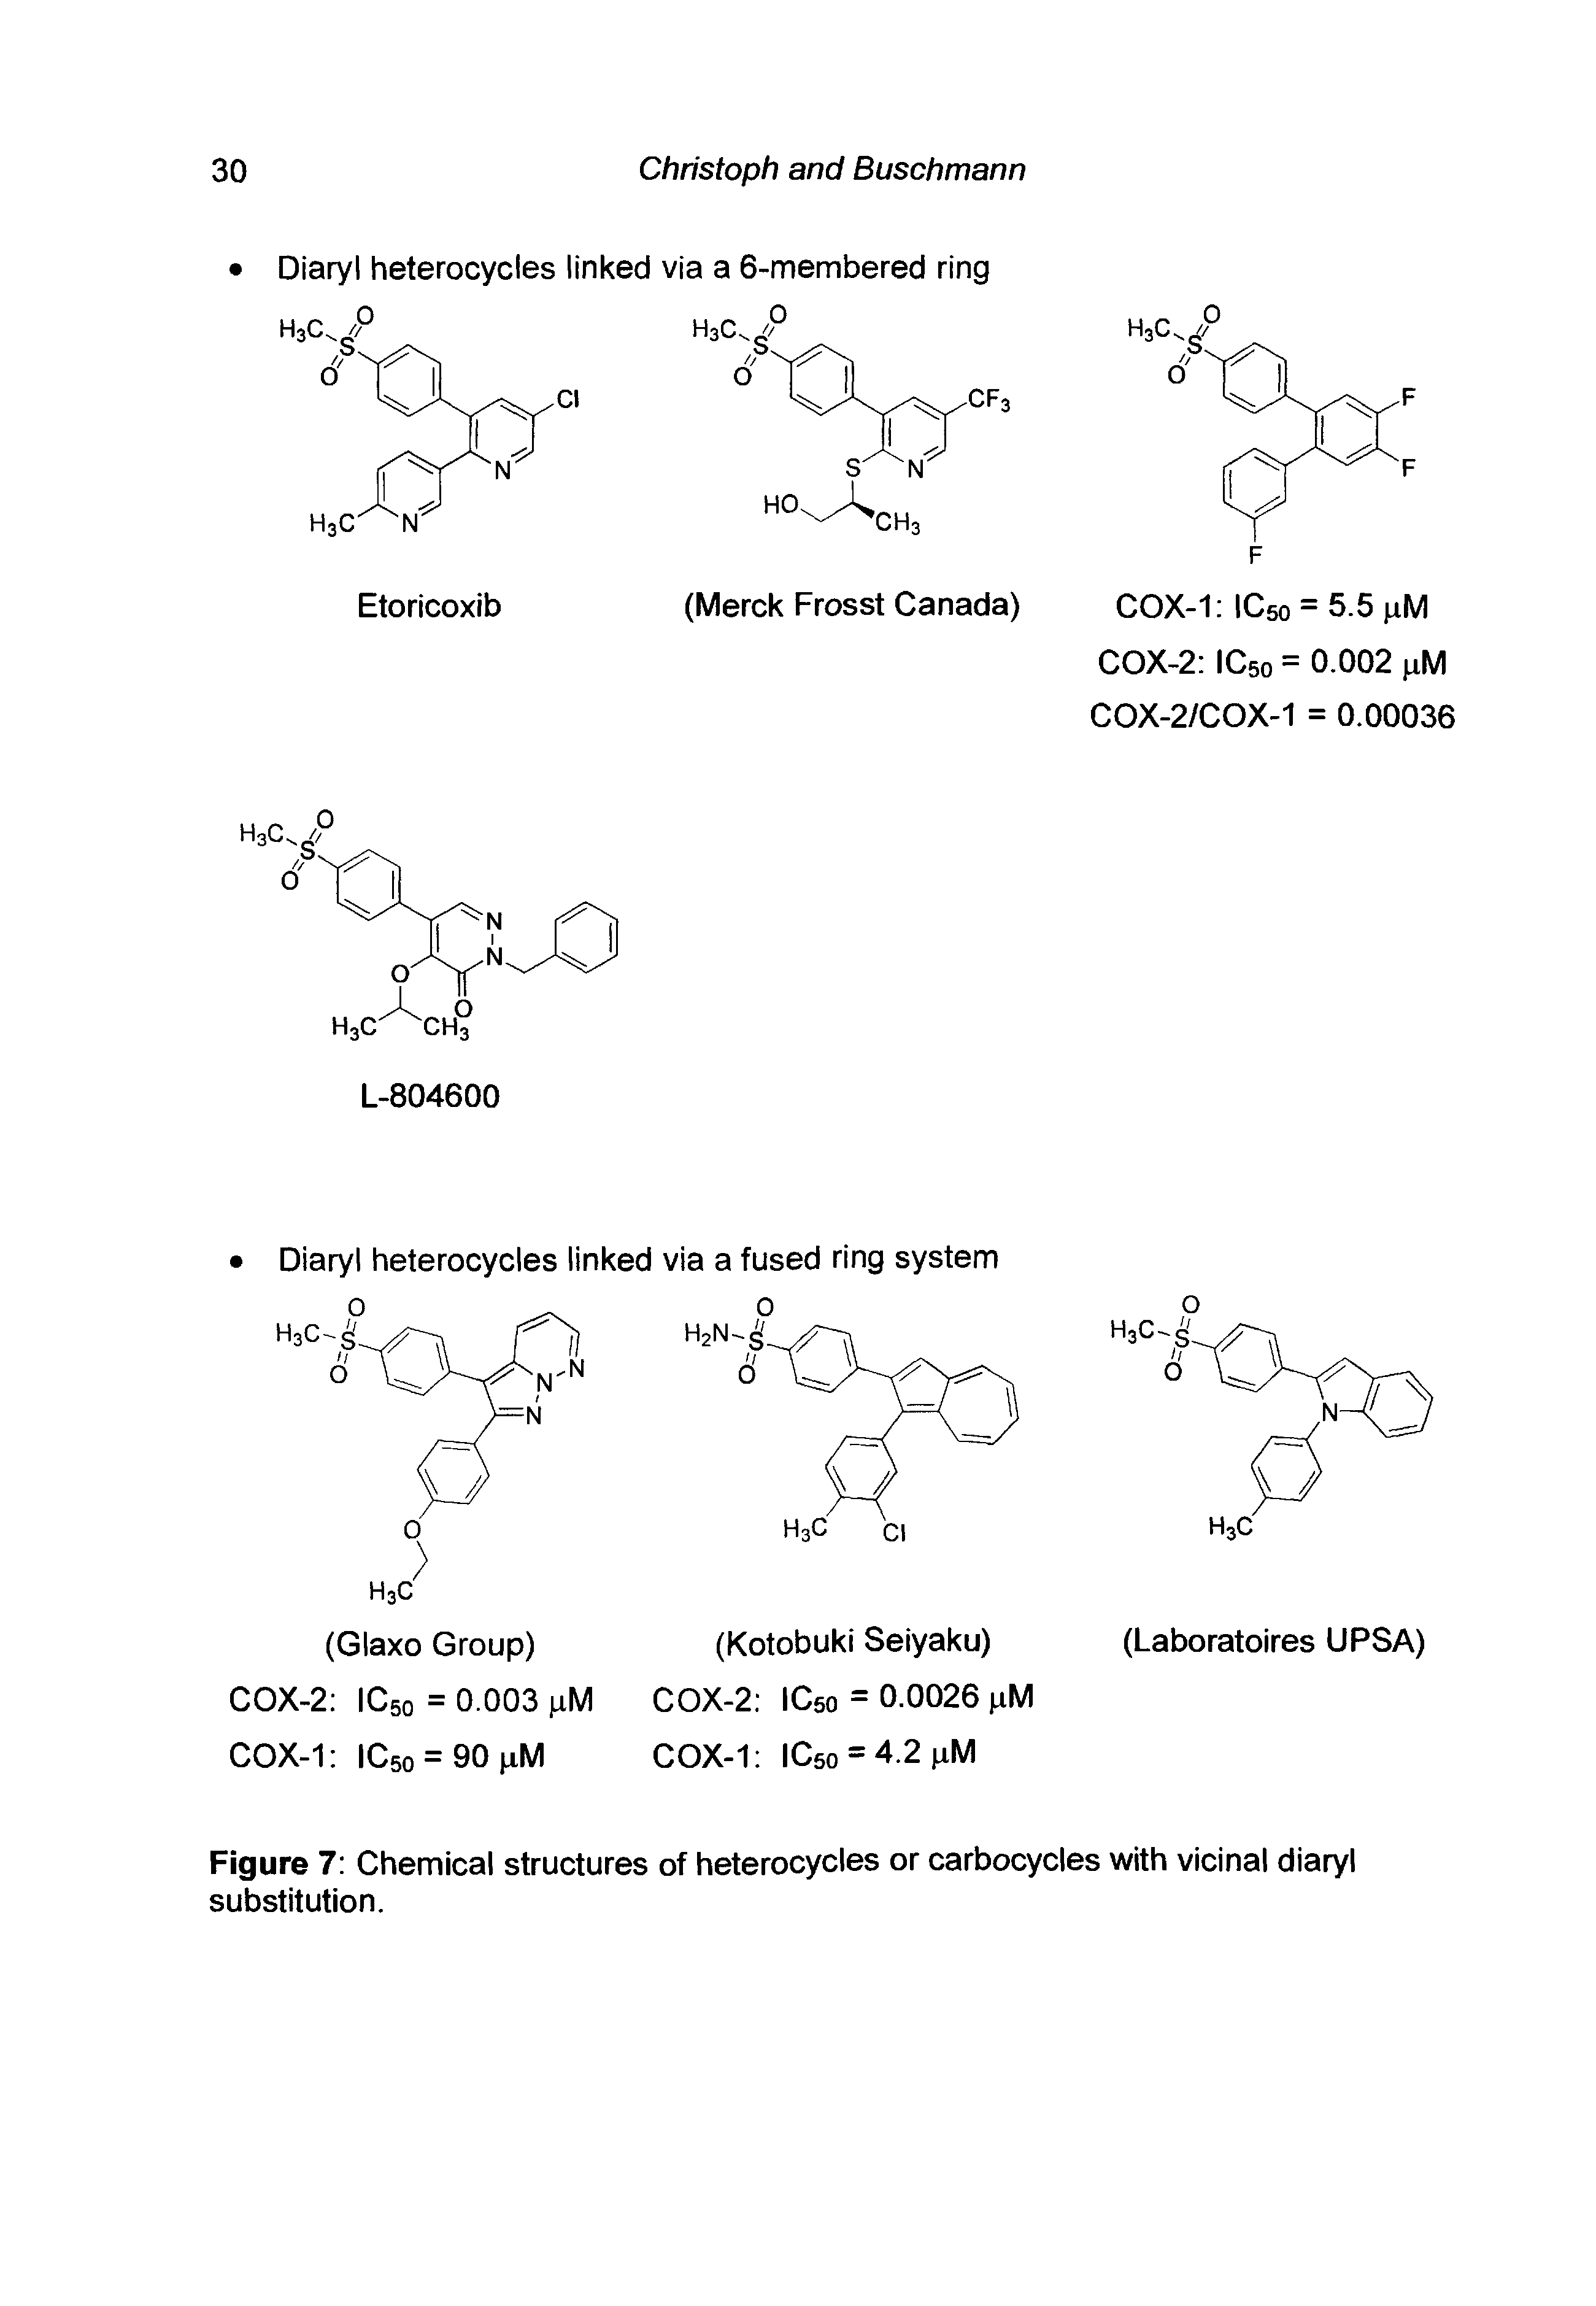 Figure 7 Chemical structures of heterocycles or carbocycles with vicinal diaryl substitution.